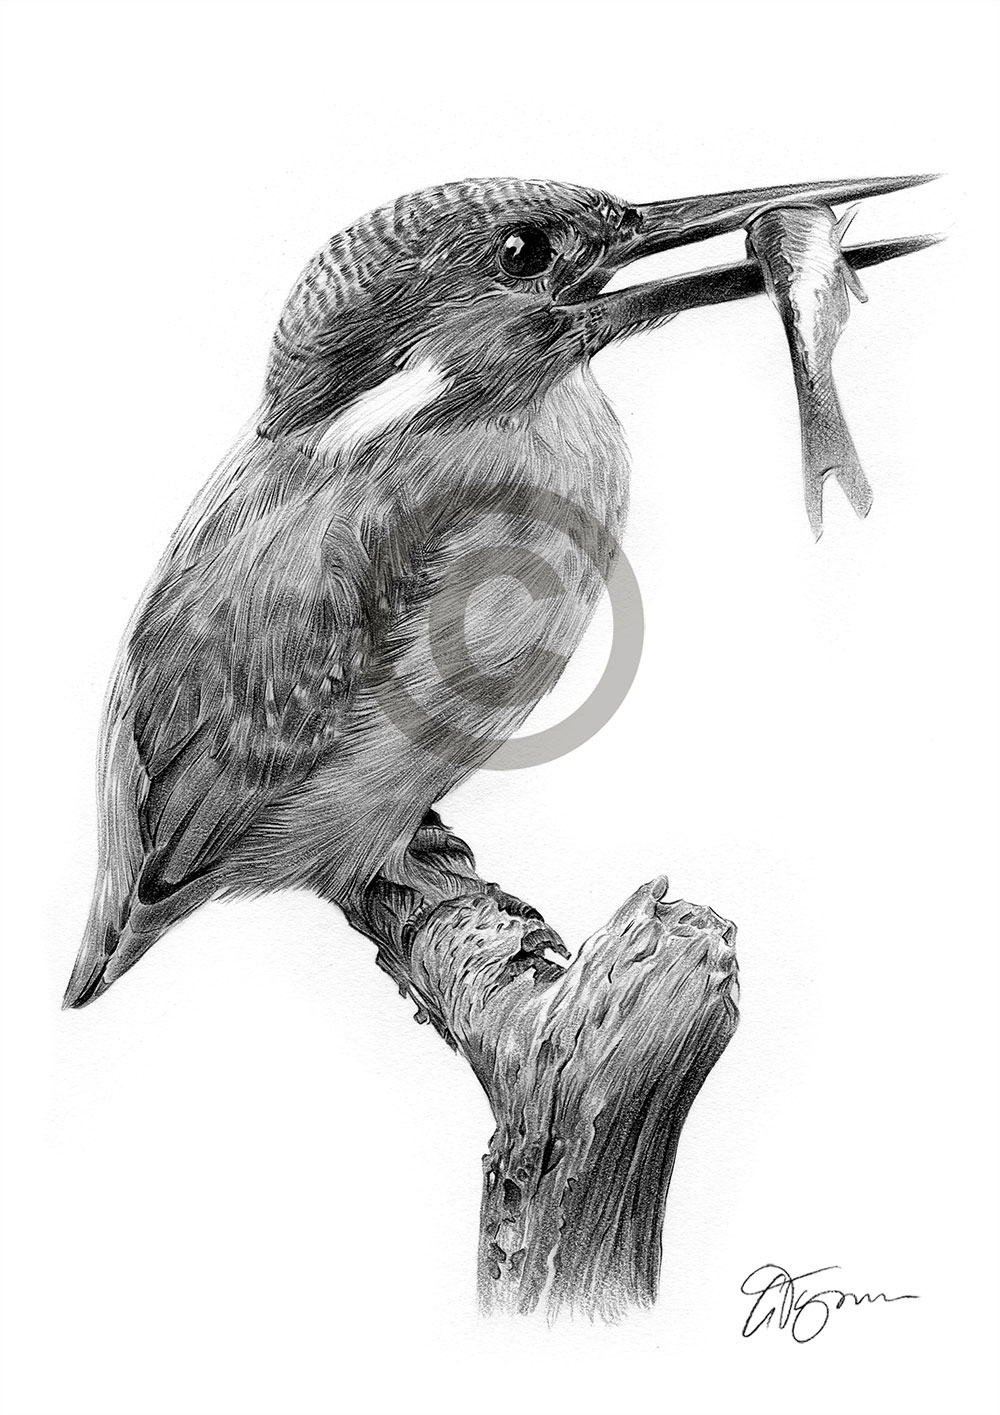 Pencil drawing of a kingfisher by artist Gary Tymon